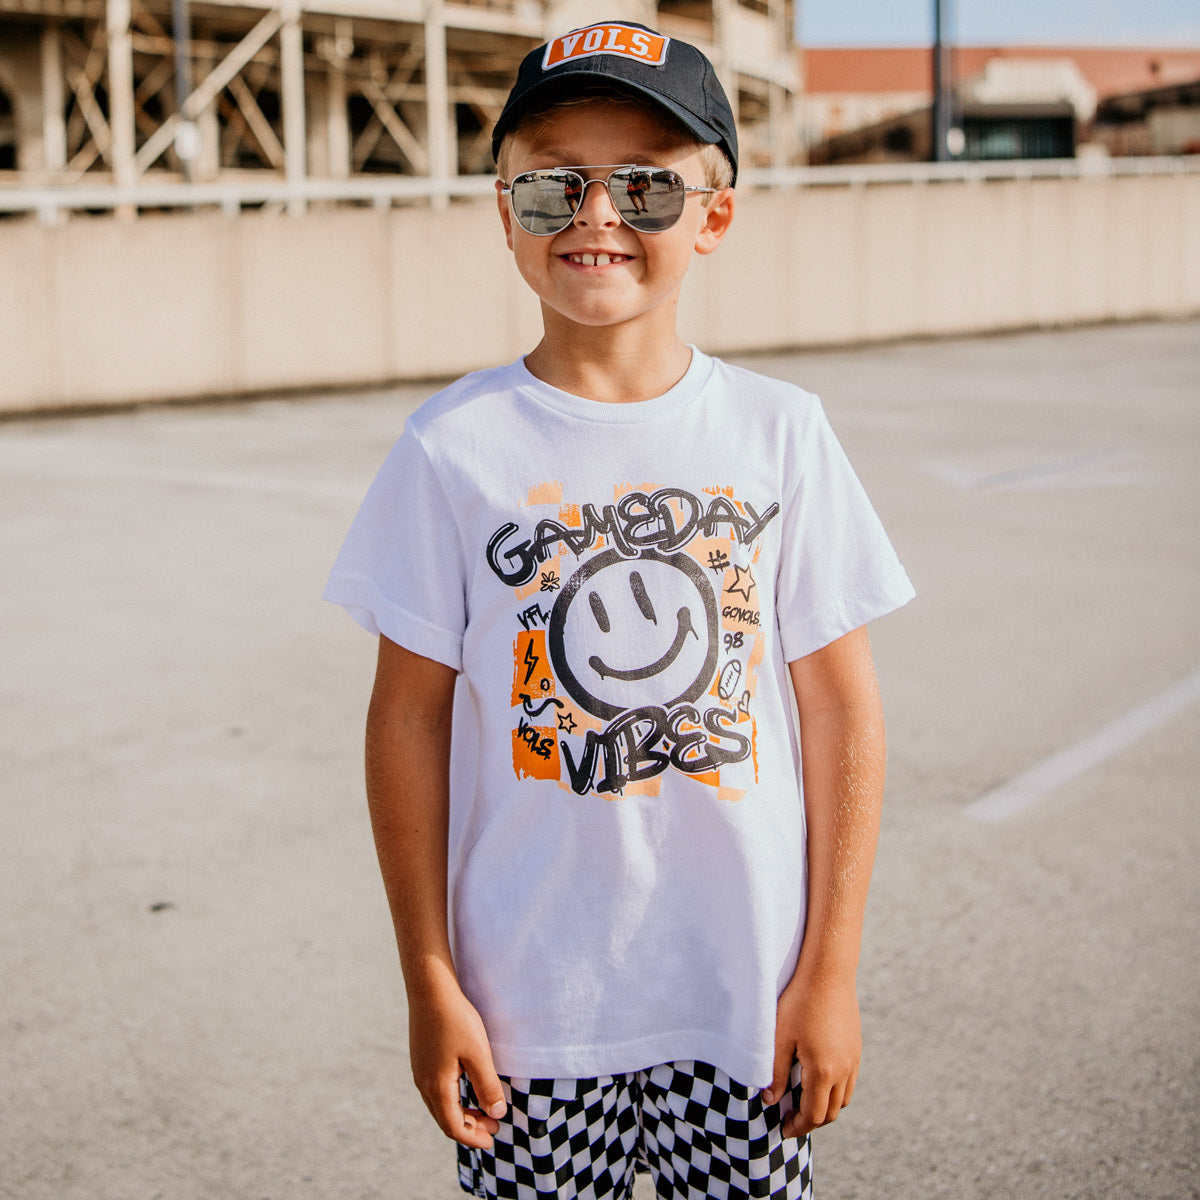 “Gameday Vibes” Short-Sleeve T-Shirt, Youth